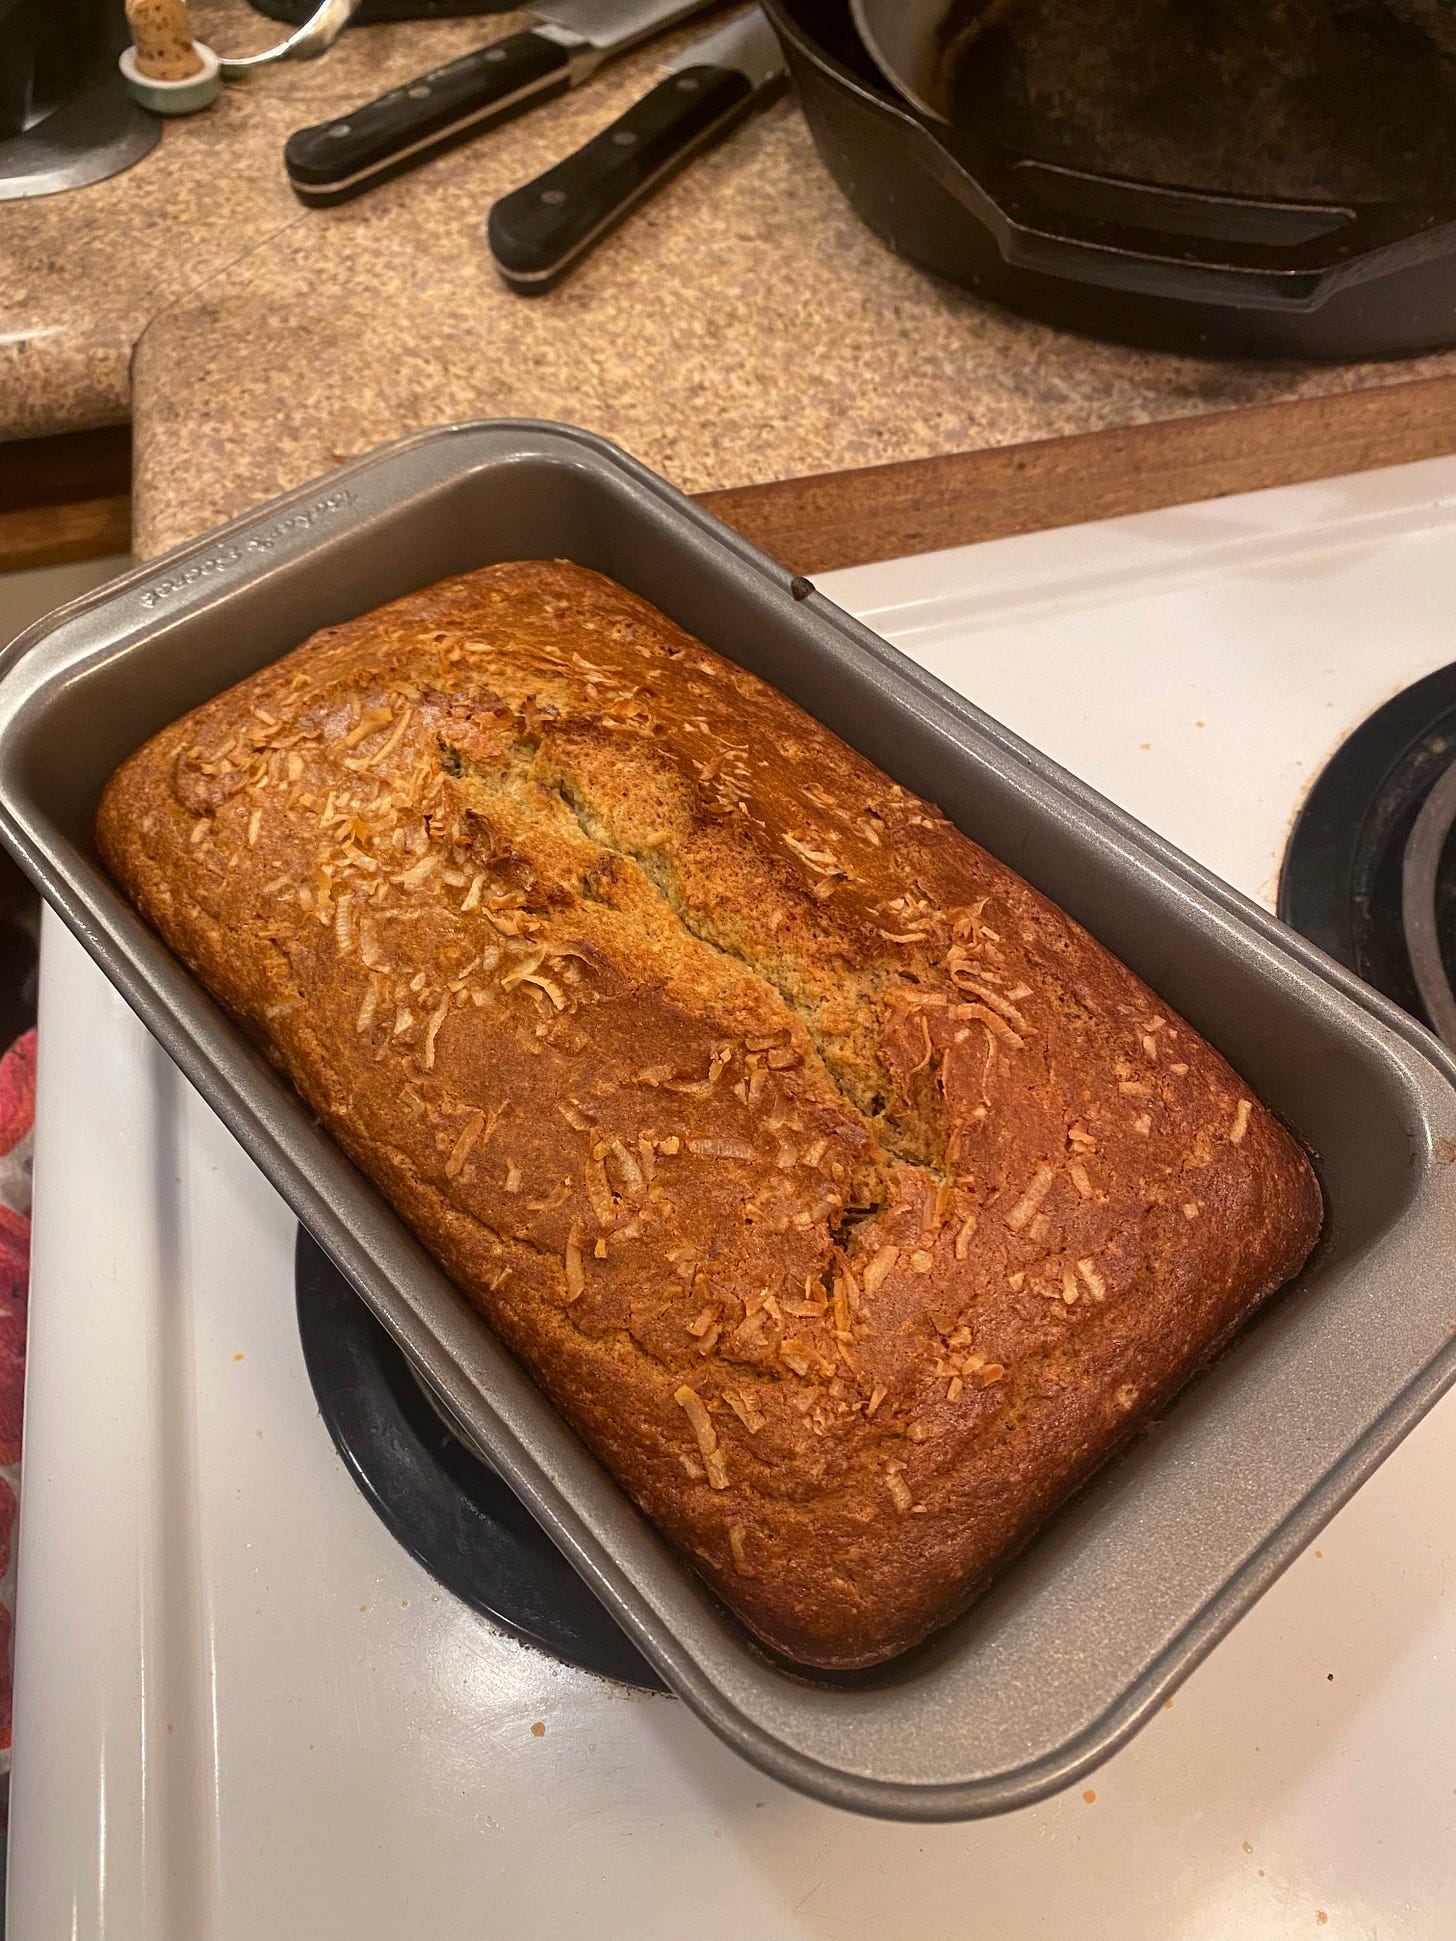 Fresh out of the oven and still in a loaf pan, a browned loaf of banana bread, split open at the top, with pieces of toasted coconut spread throughout.